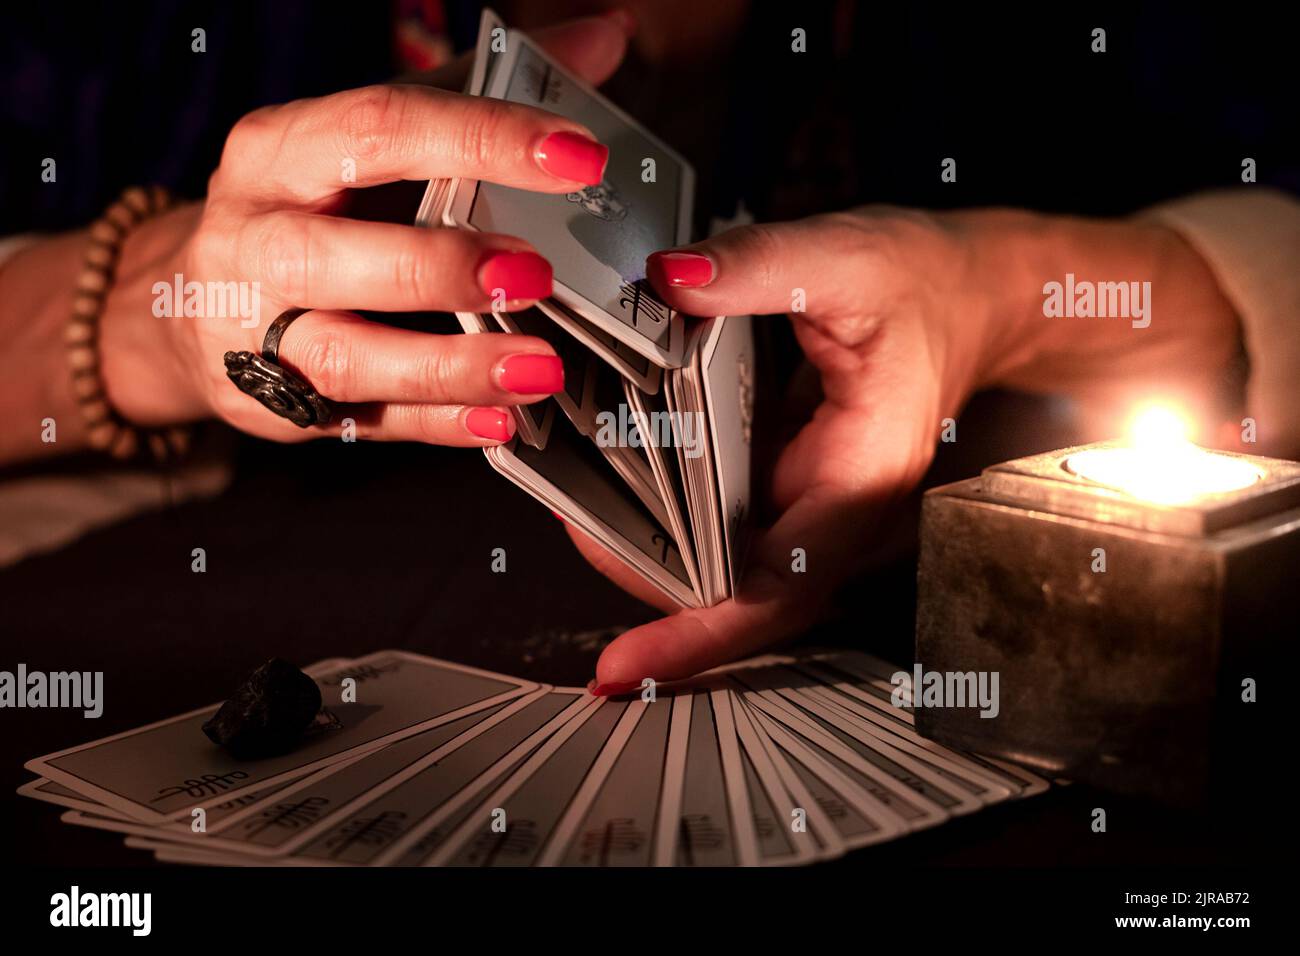 Fortune teller female hands shuffling a deck of tarot cards, during a reading. Close-up with candle light, moody atmosphere. Stock Photo